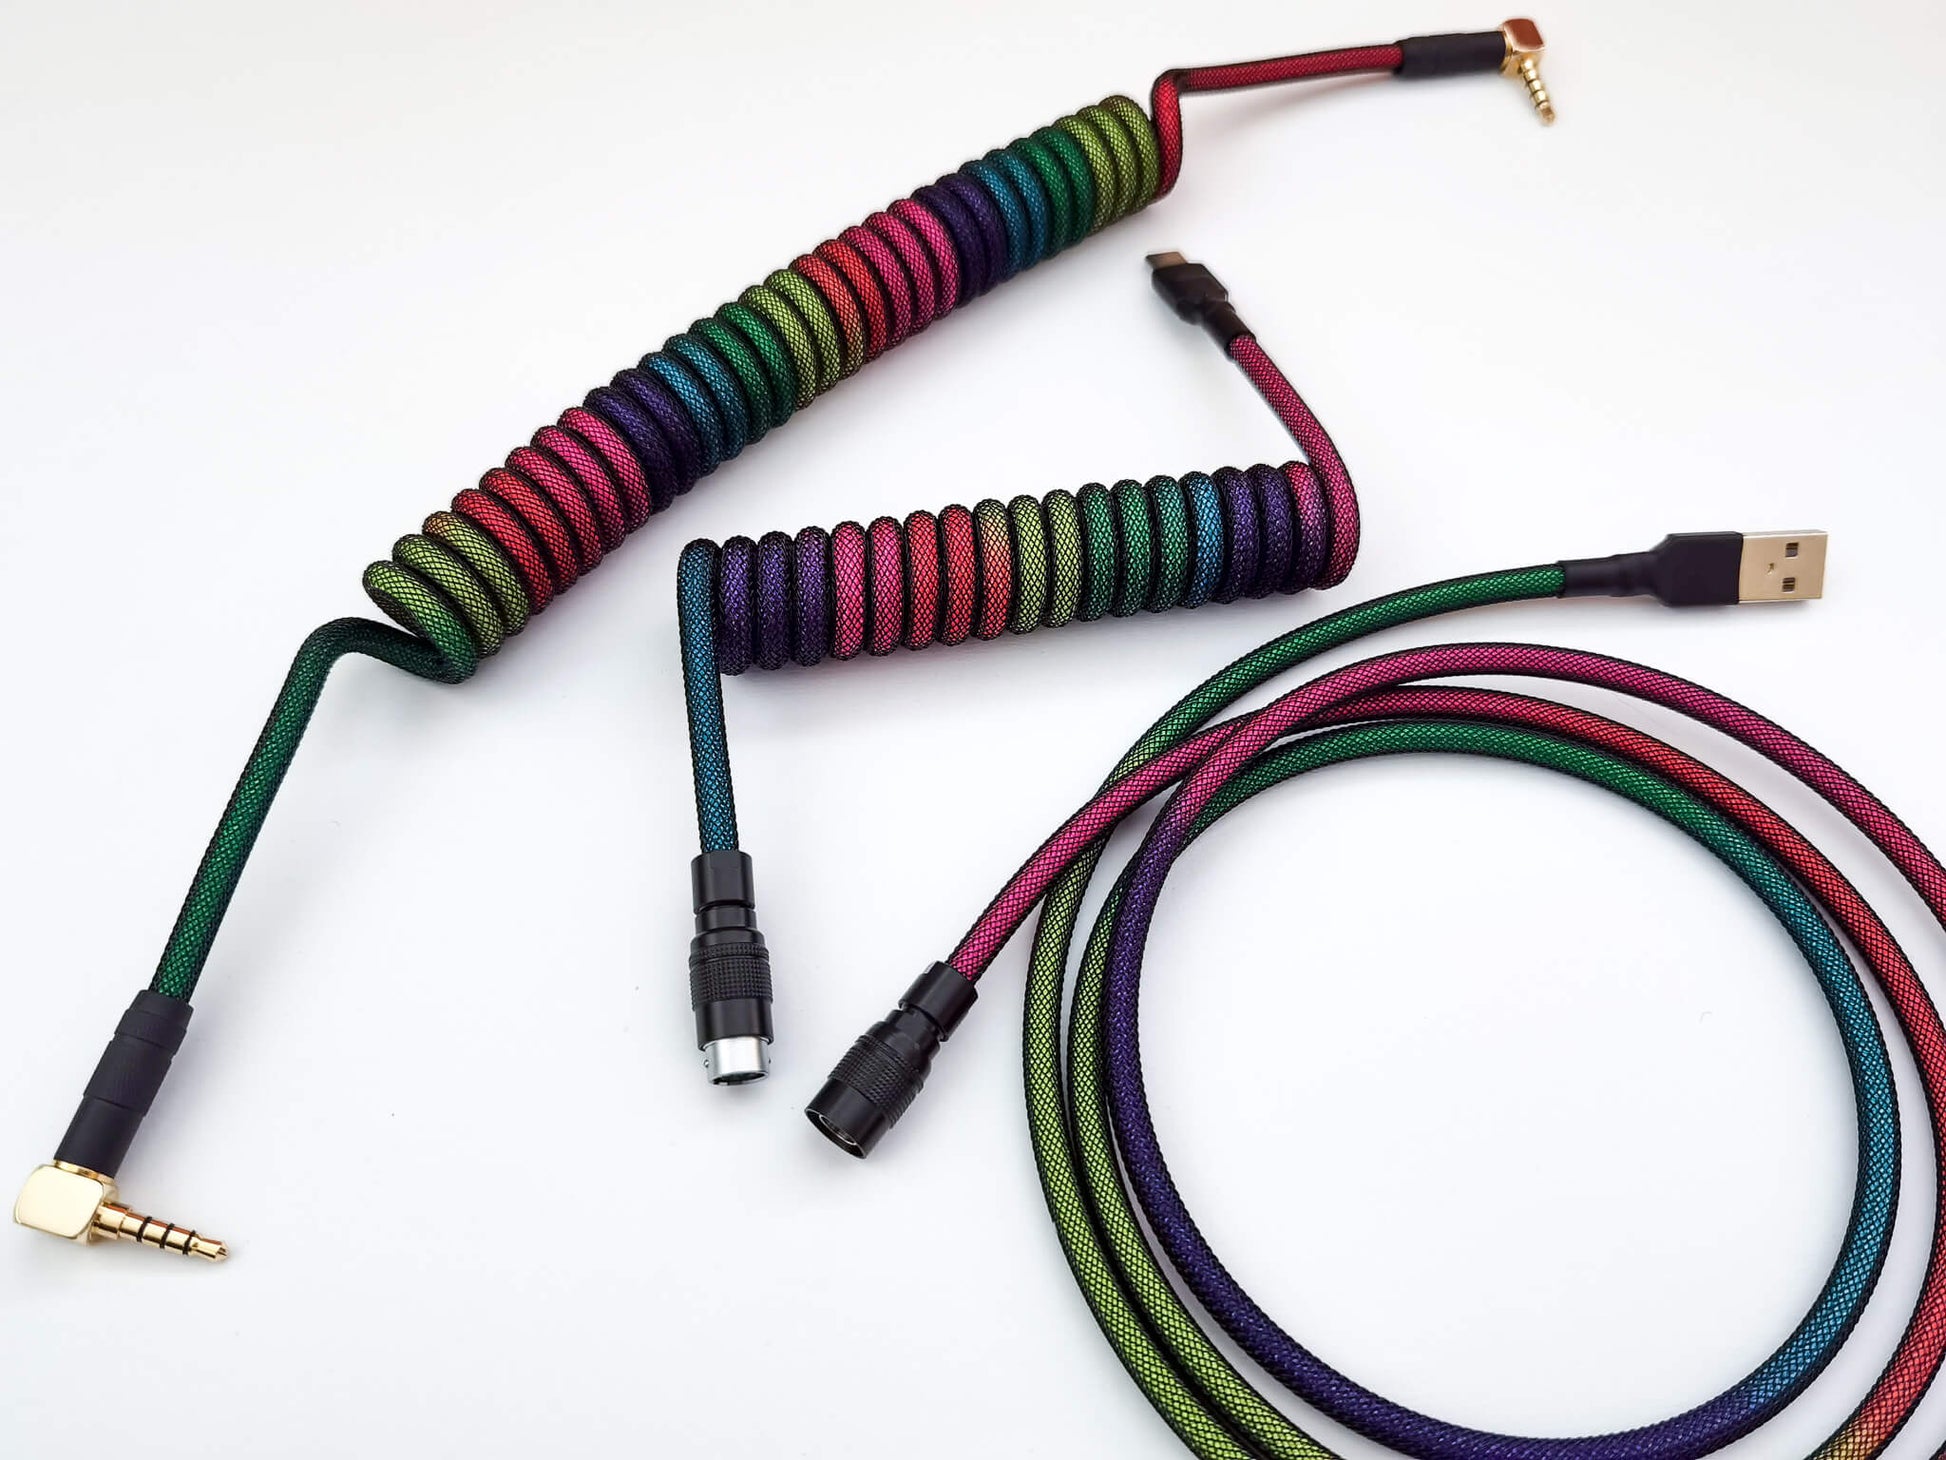 Custom coiled TRRS cable and coiled USB C keyboard cable